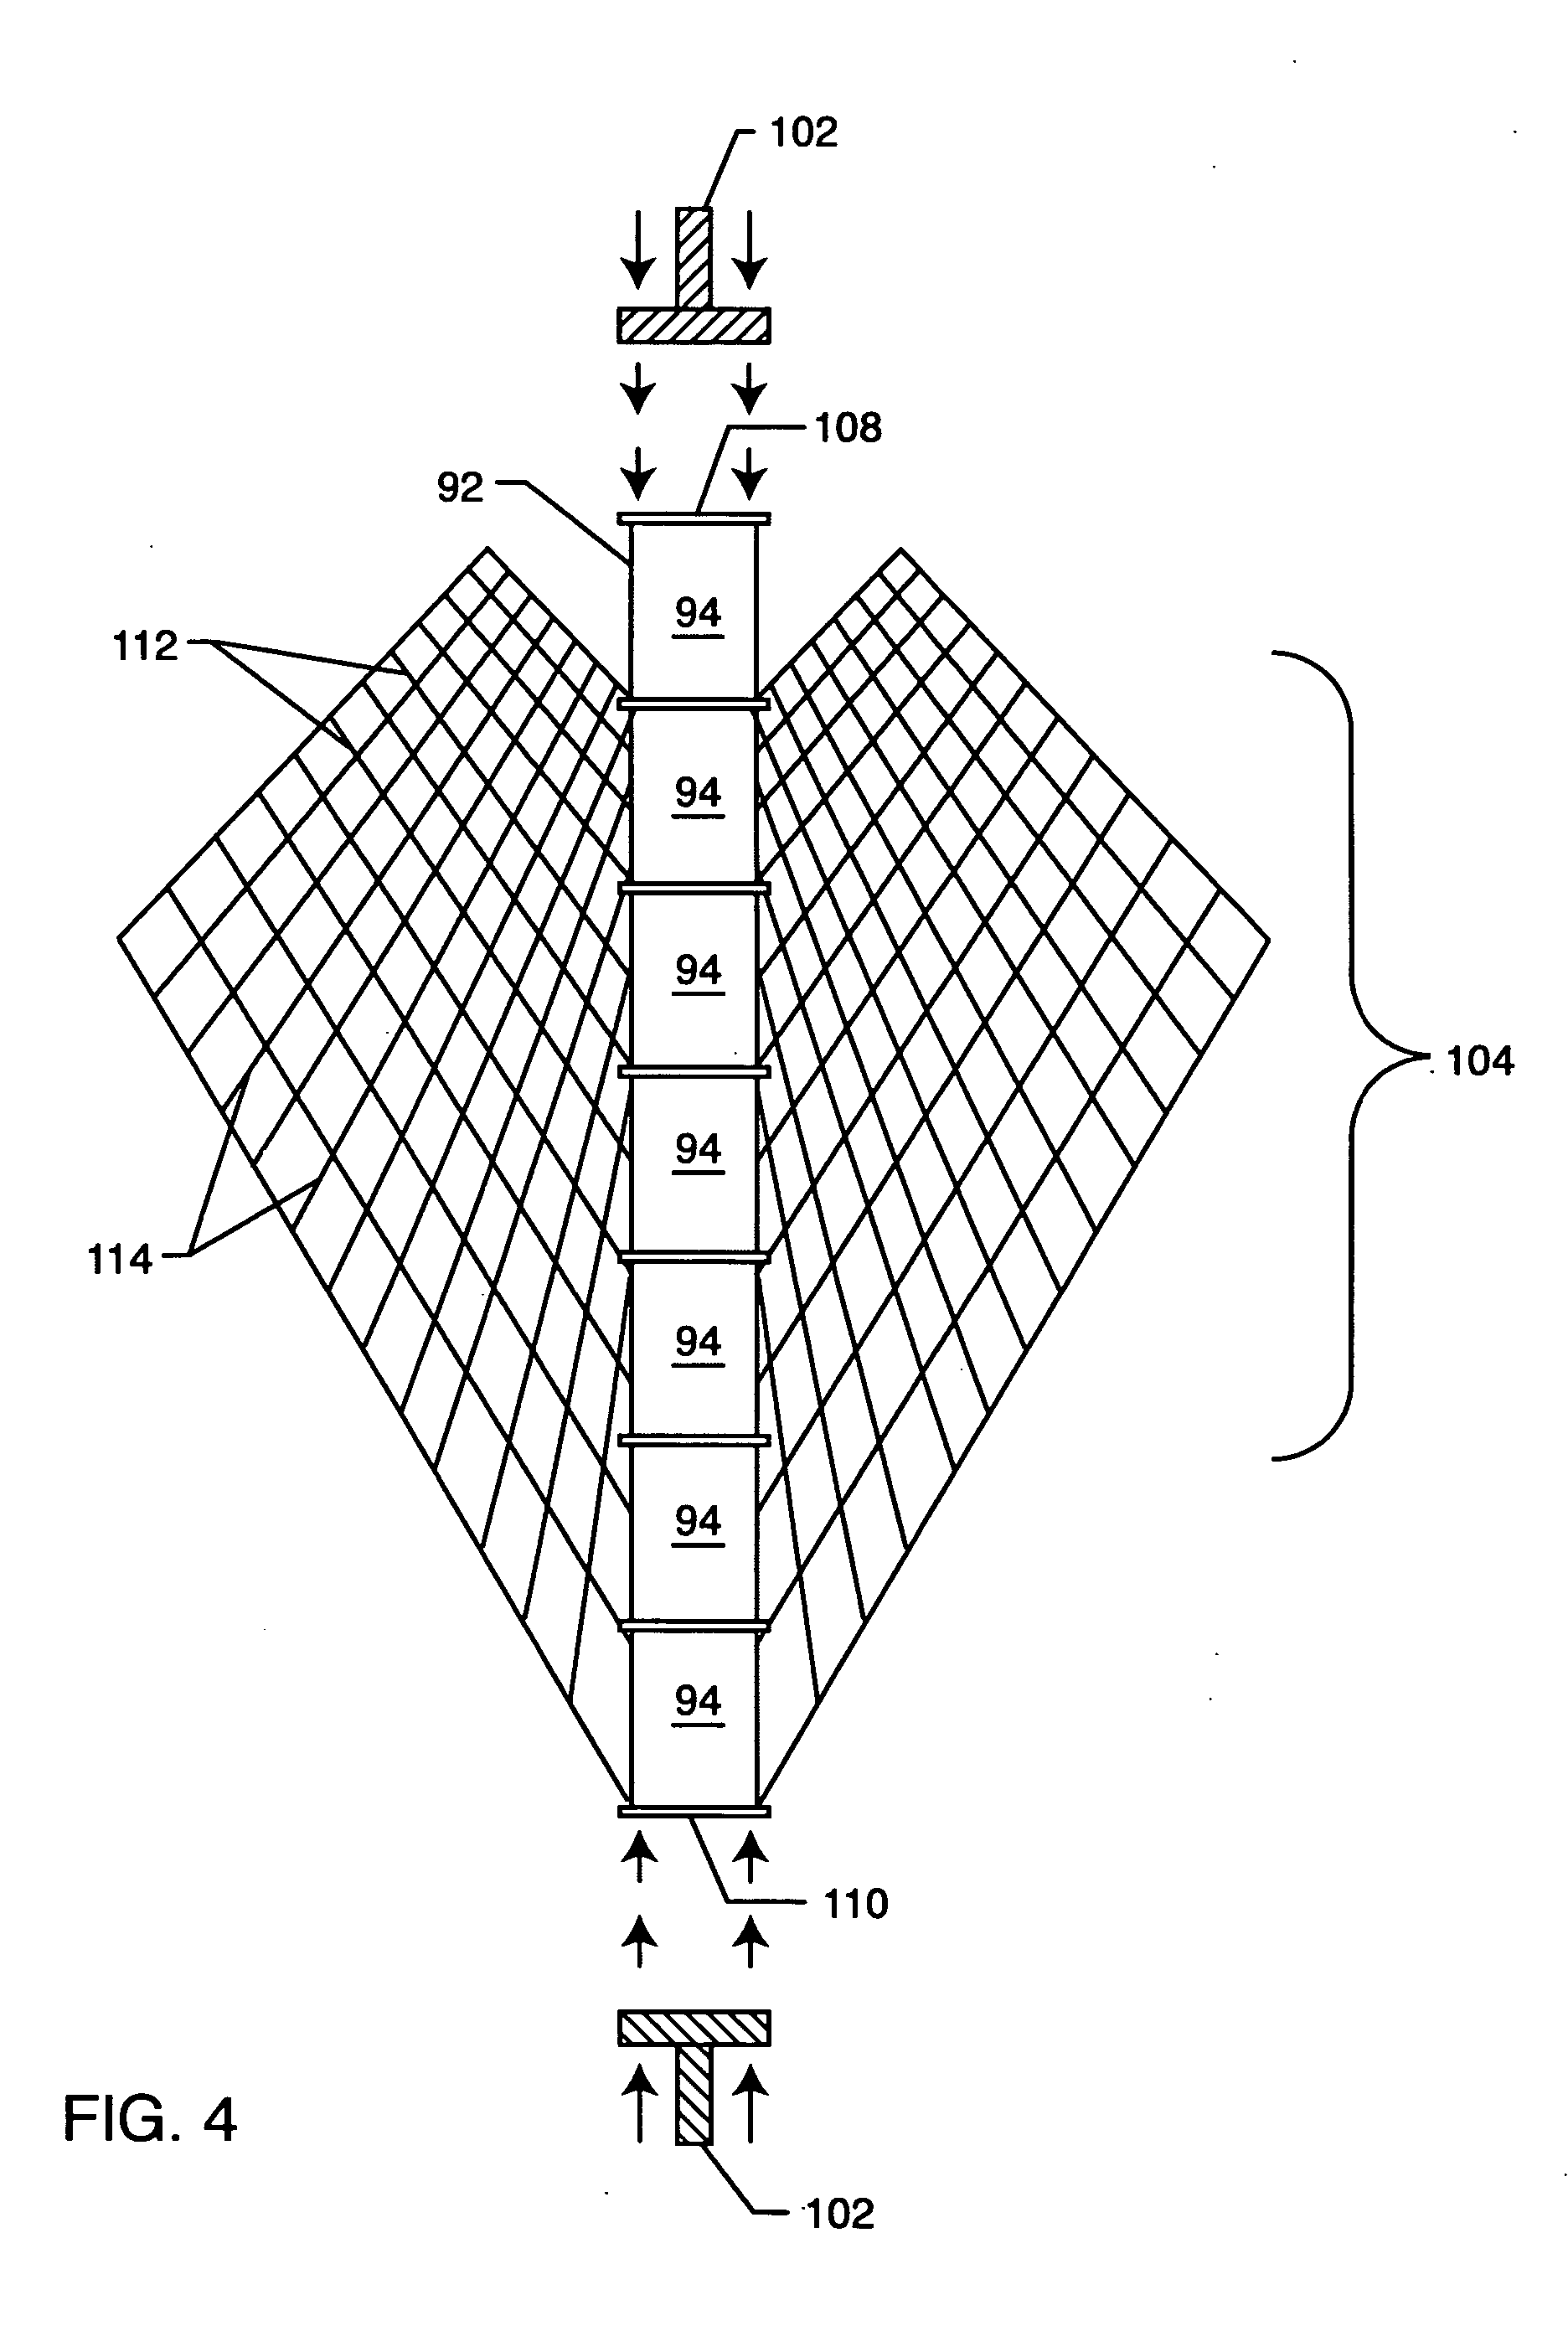 Structural panel and method of fabrication